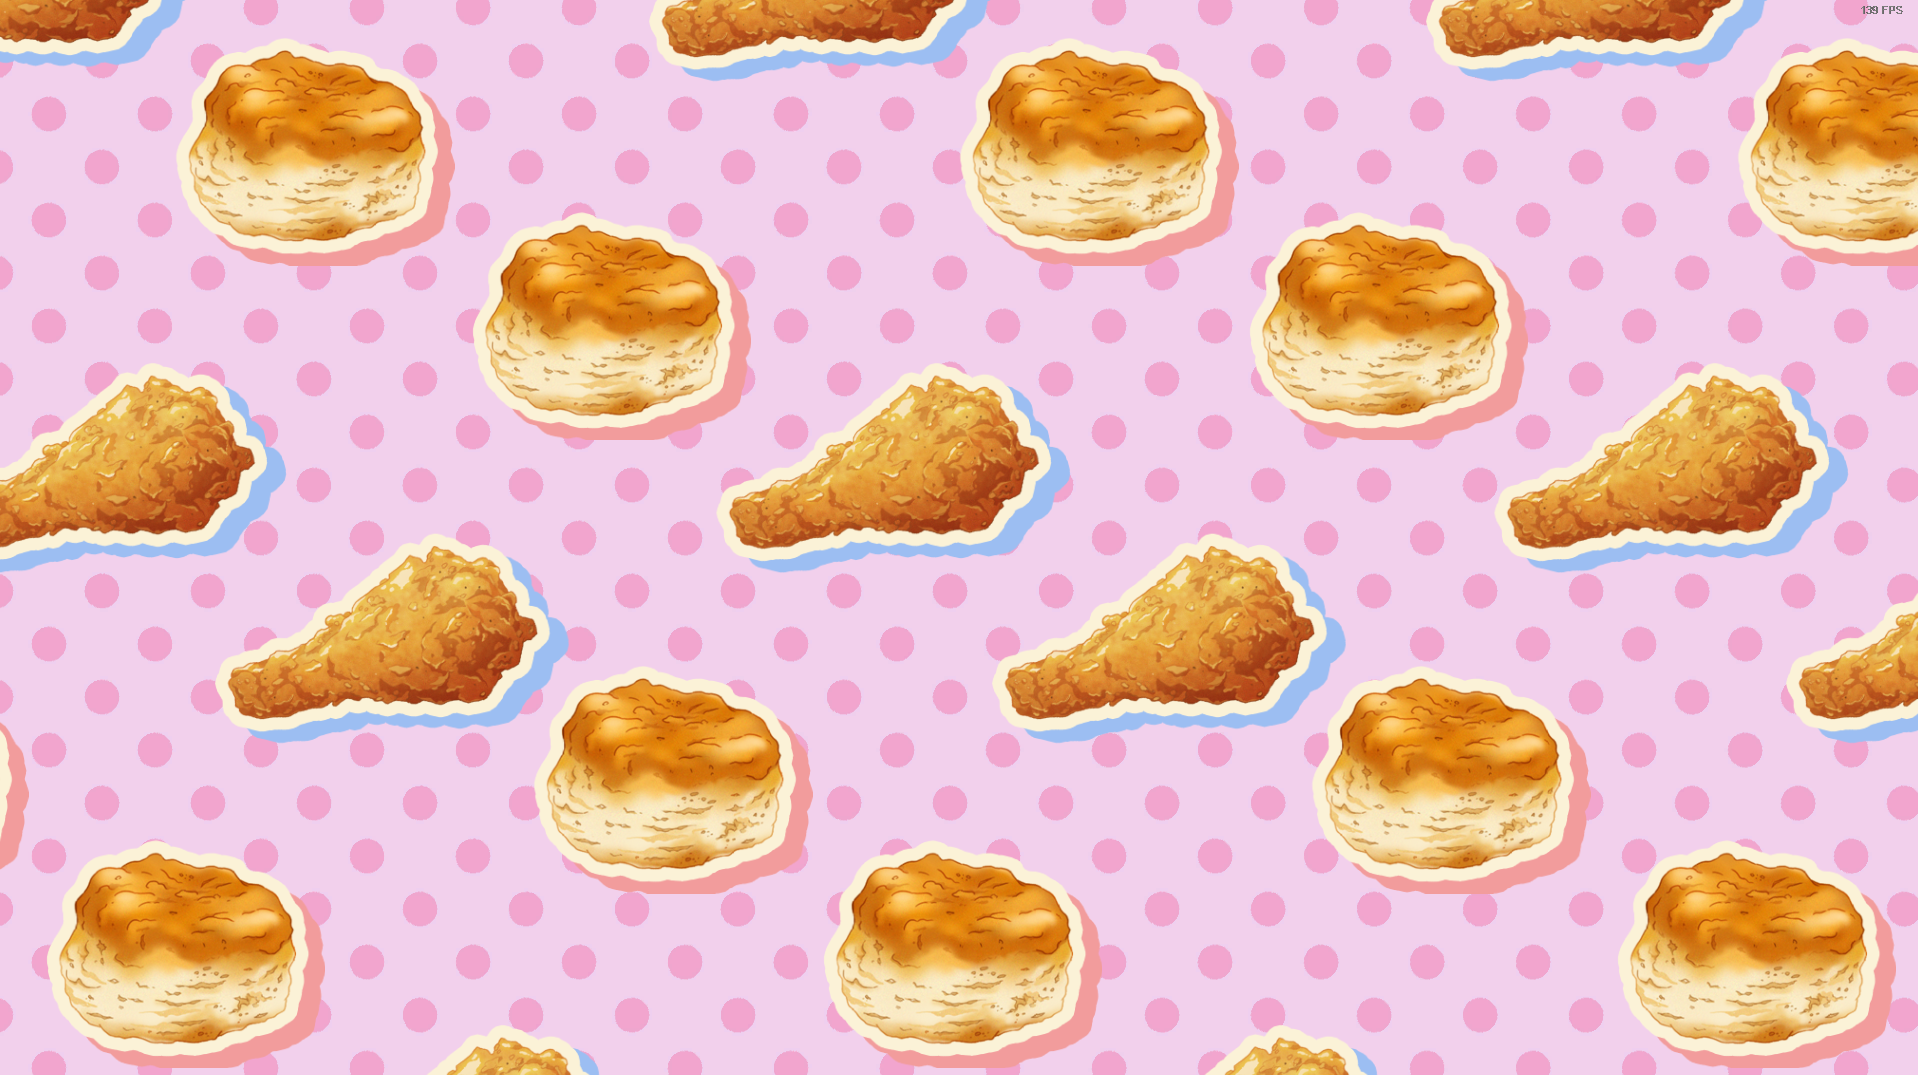 Chicken And Biscuits Wallpaper From I Love You Colonel Sanders